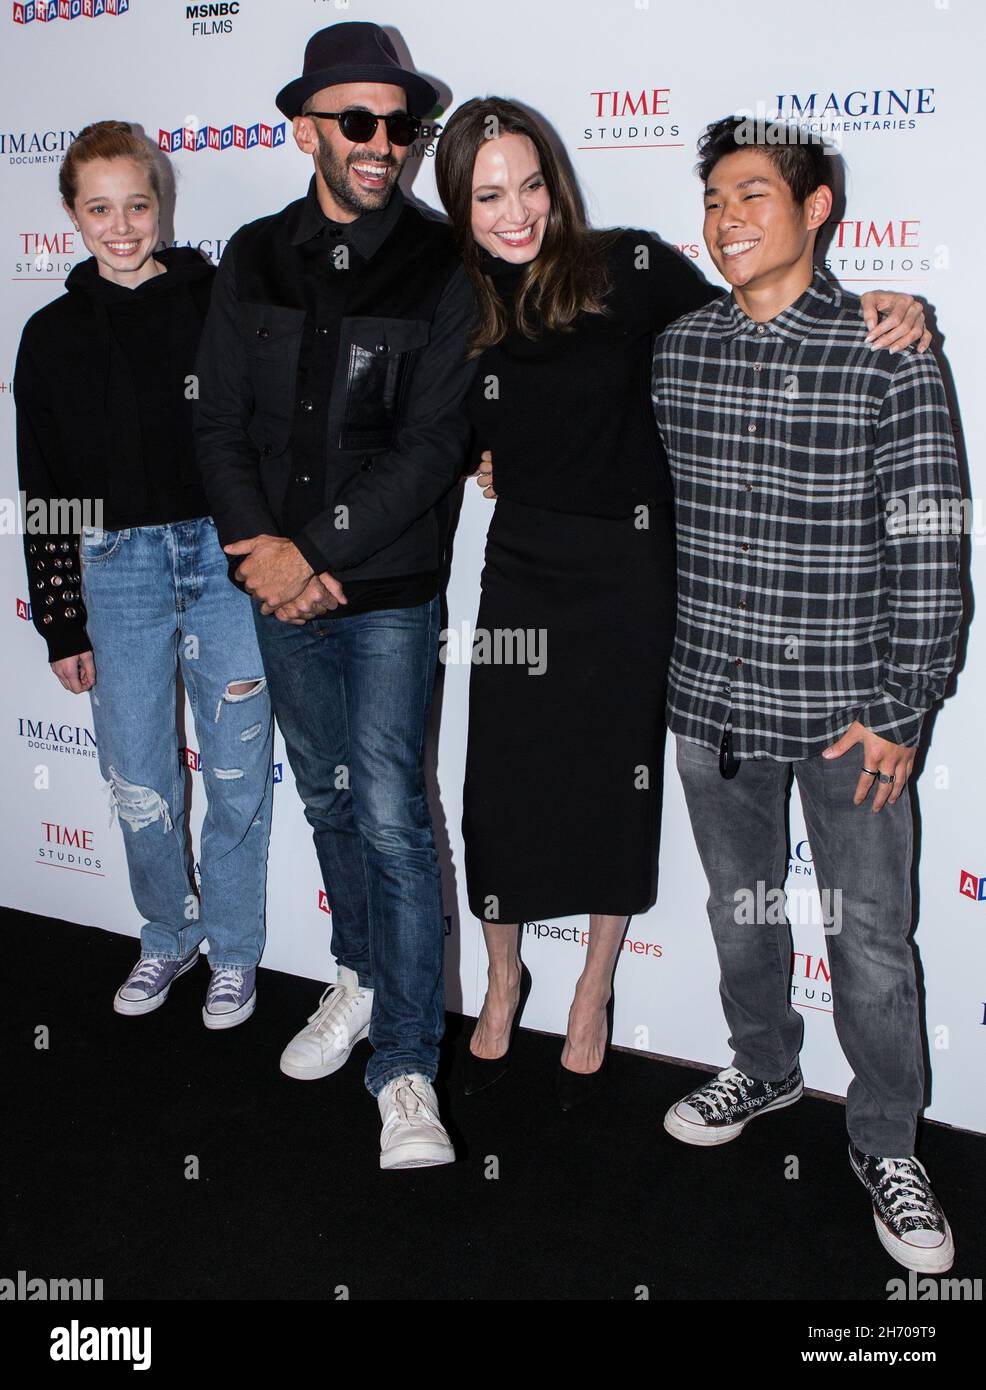 Los Angeles, United States. 18th Nov, 2021. LOS ANGELES, CALIFORNIA, USA - NOVEMBER 18: Shiloh Jolie-Pitt, street artist JR, actress Angelina Jolie and Pax Thien Jolie-Pitt arrive at the Los Angeles Premiere Of MSNBC Films' 'Paper & Glue: A JR Project' held at the Museum Of Tolerance on November 18, 2021 in Los Angeles, California, United States. (Photo by Rudy Torres/Image Press Agency) Credit: Image Press Agency/Alamy Live News Stock Photo